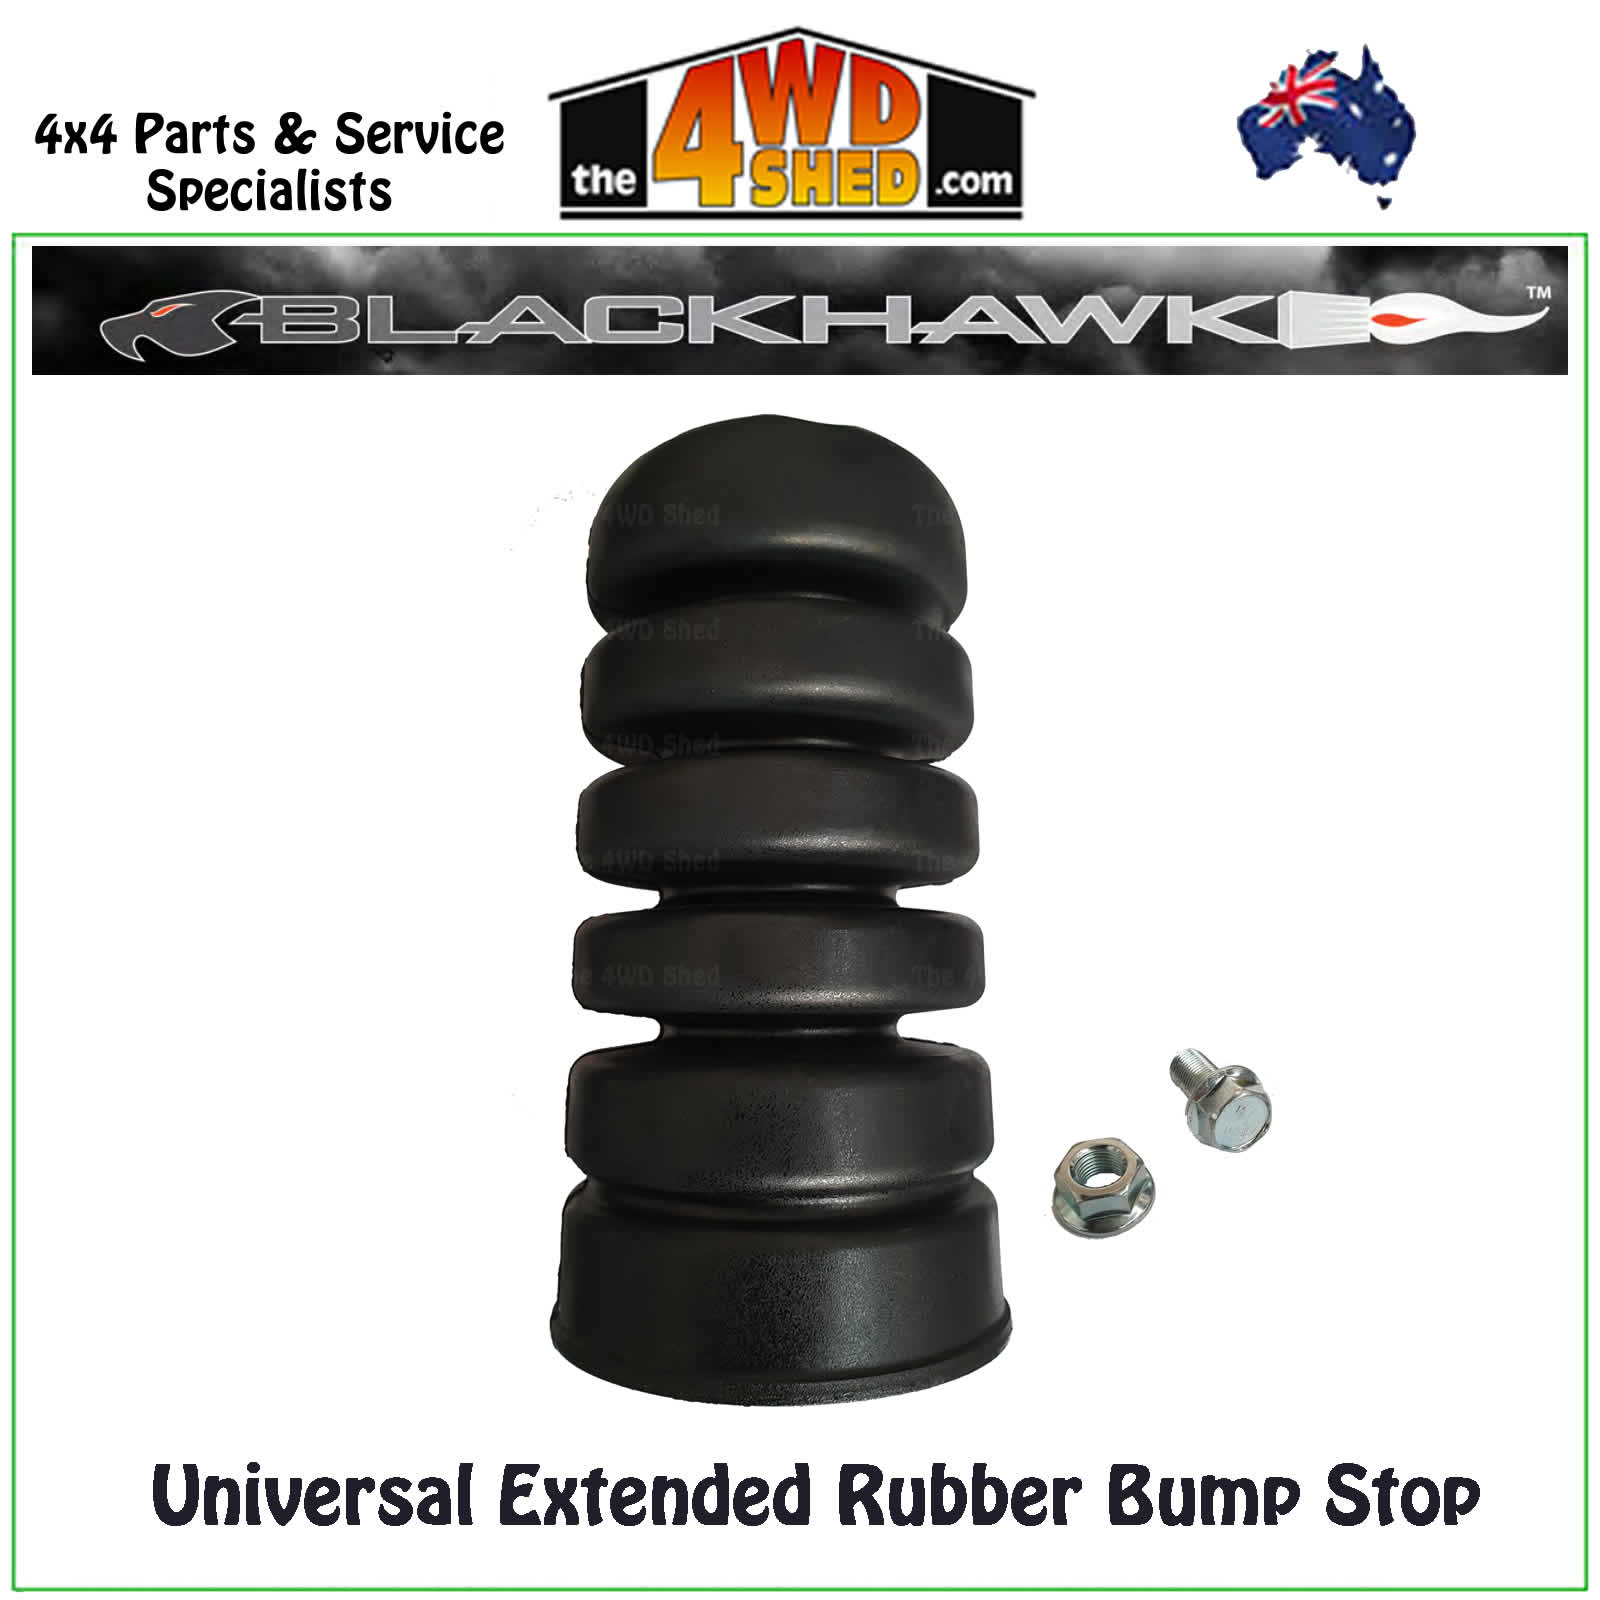 Universal Extended Rubber Bump Stop